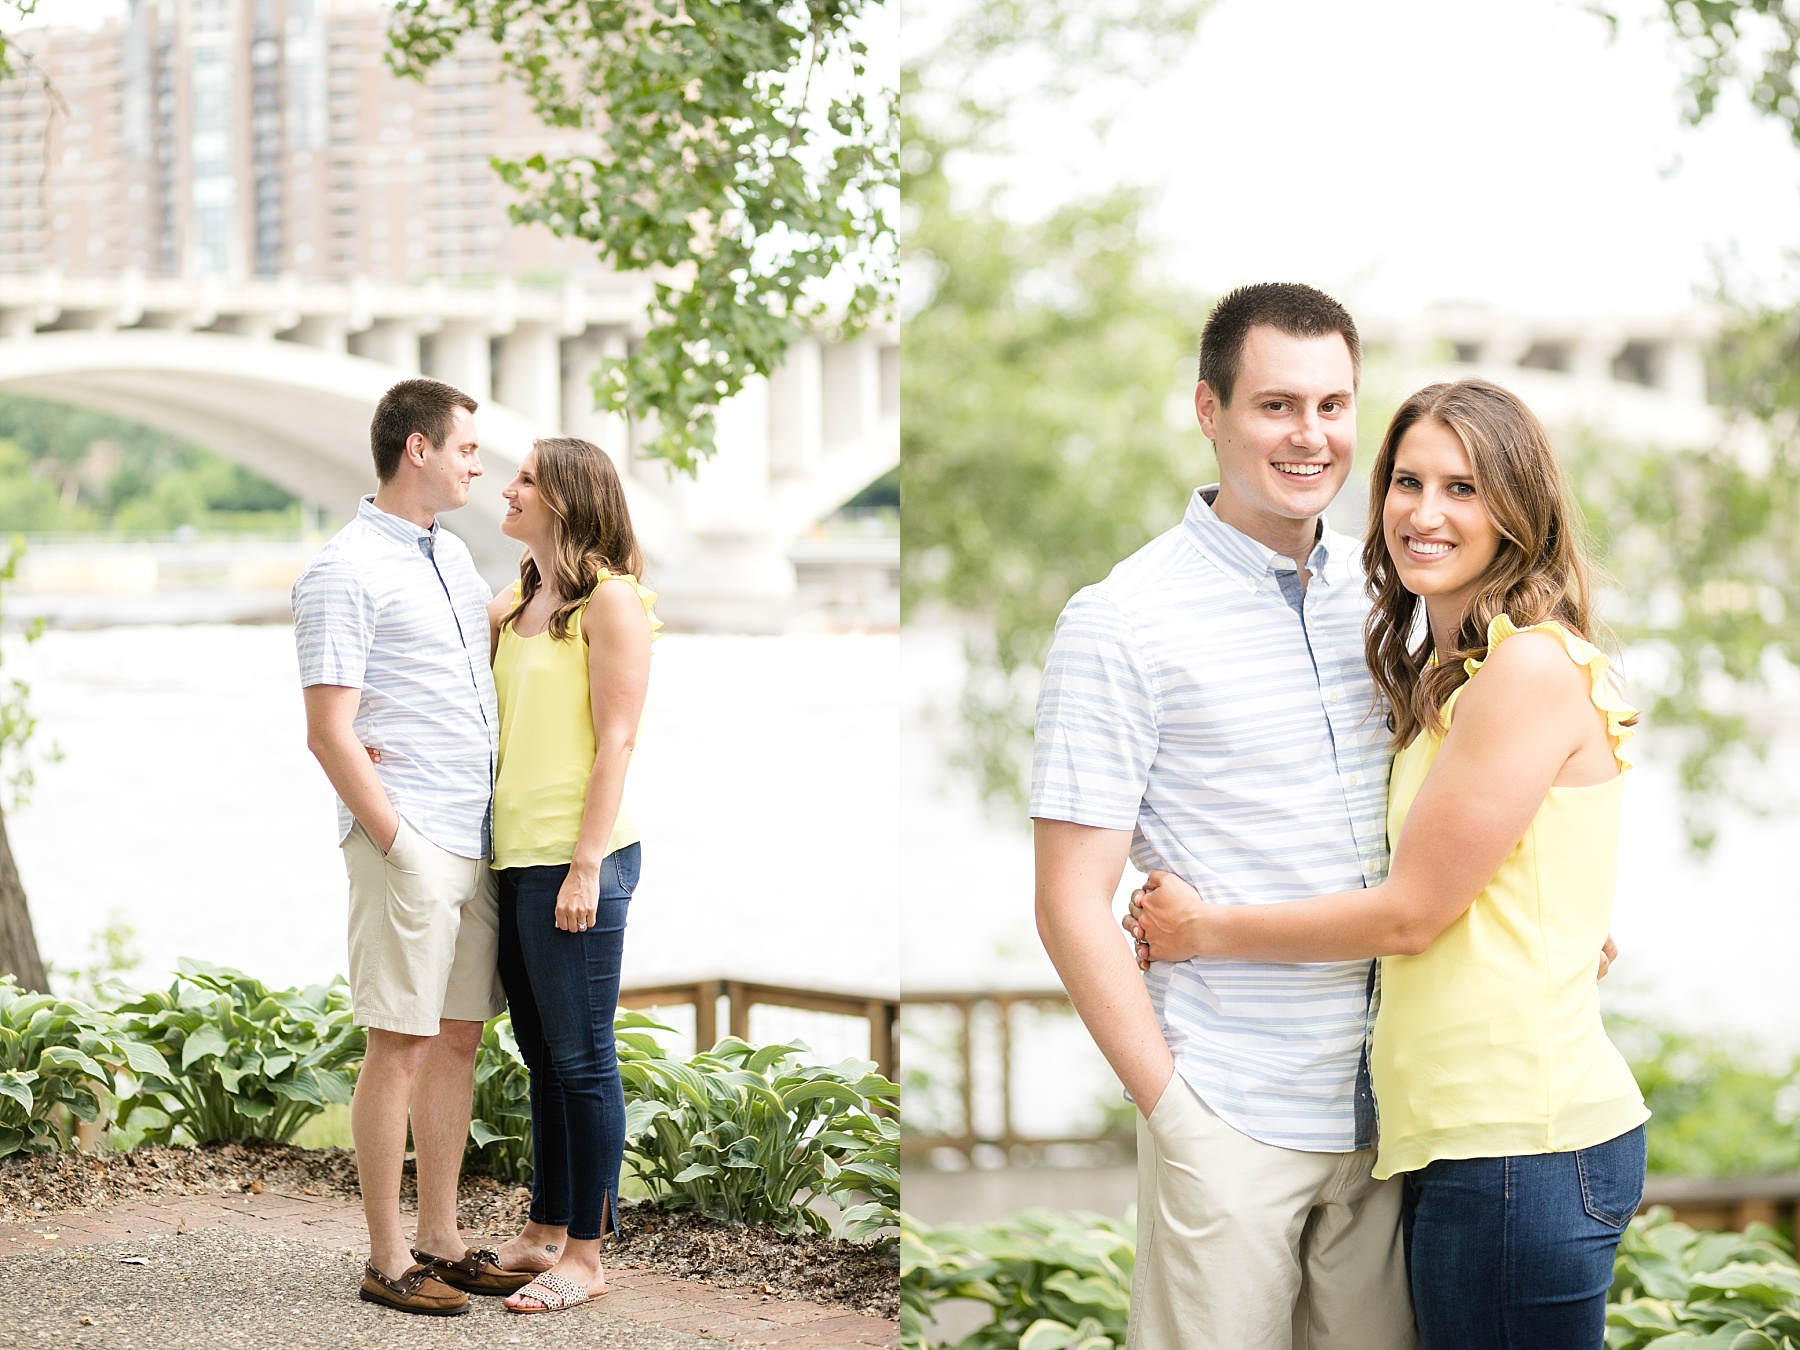 They grew up in the same small town, but met in Minneapolis, so it's perfect that they now have Stone Arch Bridge Minneapolis engagement photos!